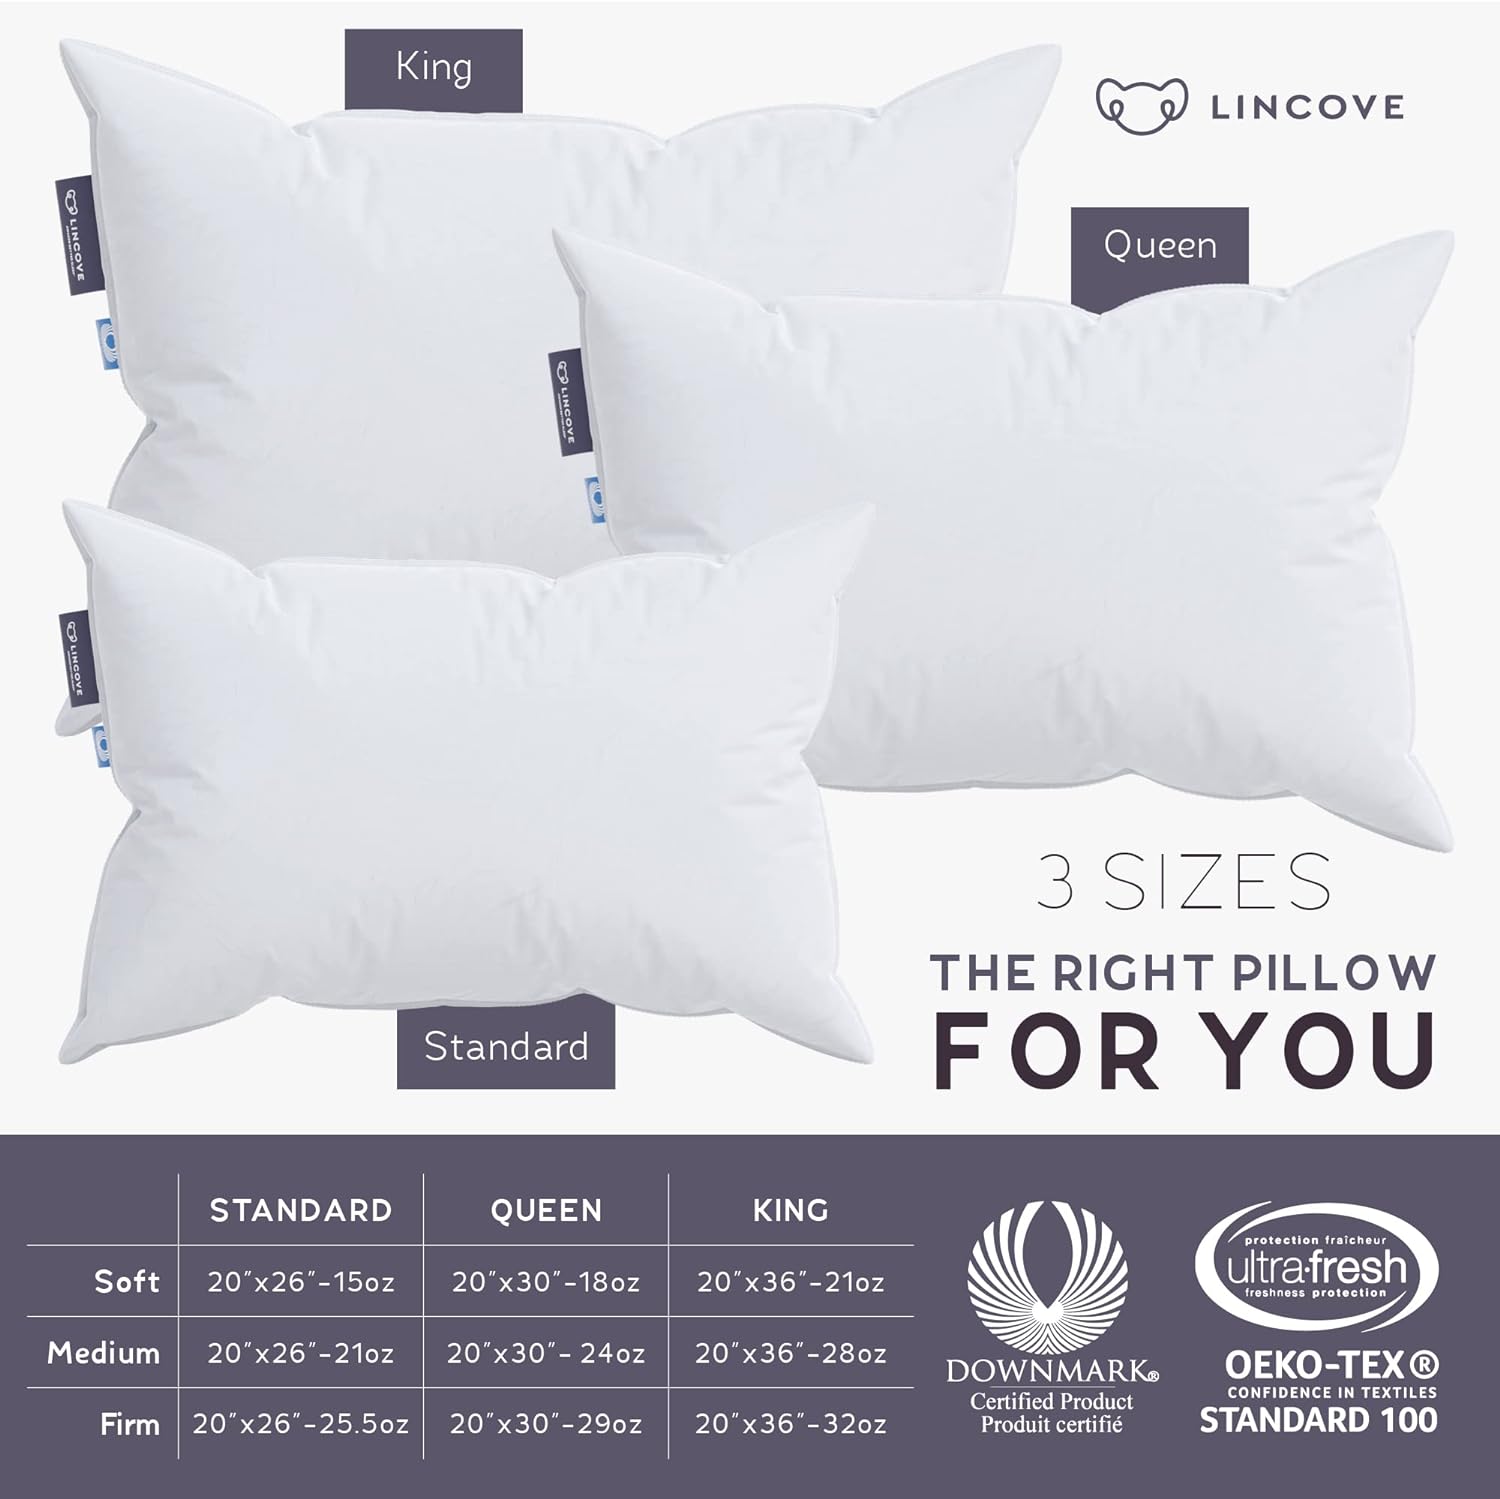 Lincove Cloud Natural Canadian White Down Luxury Sleeping Pillow - 625 Fill Power, 500 Thread Count Cotton Shell, Made in Canada, King - Soft, 1 Pack